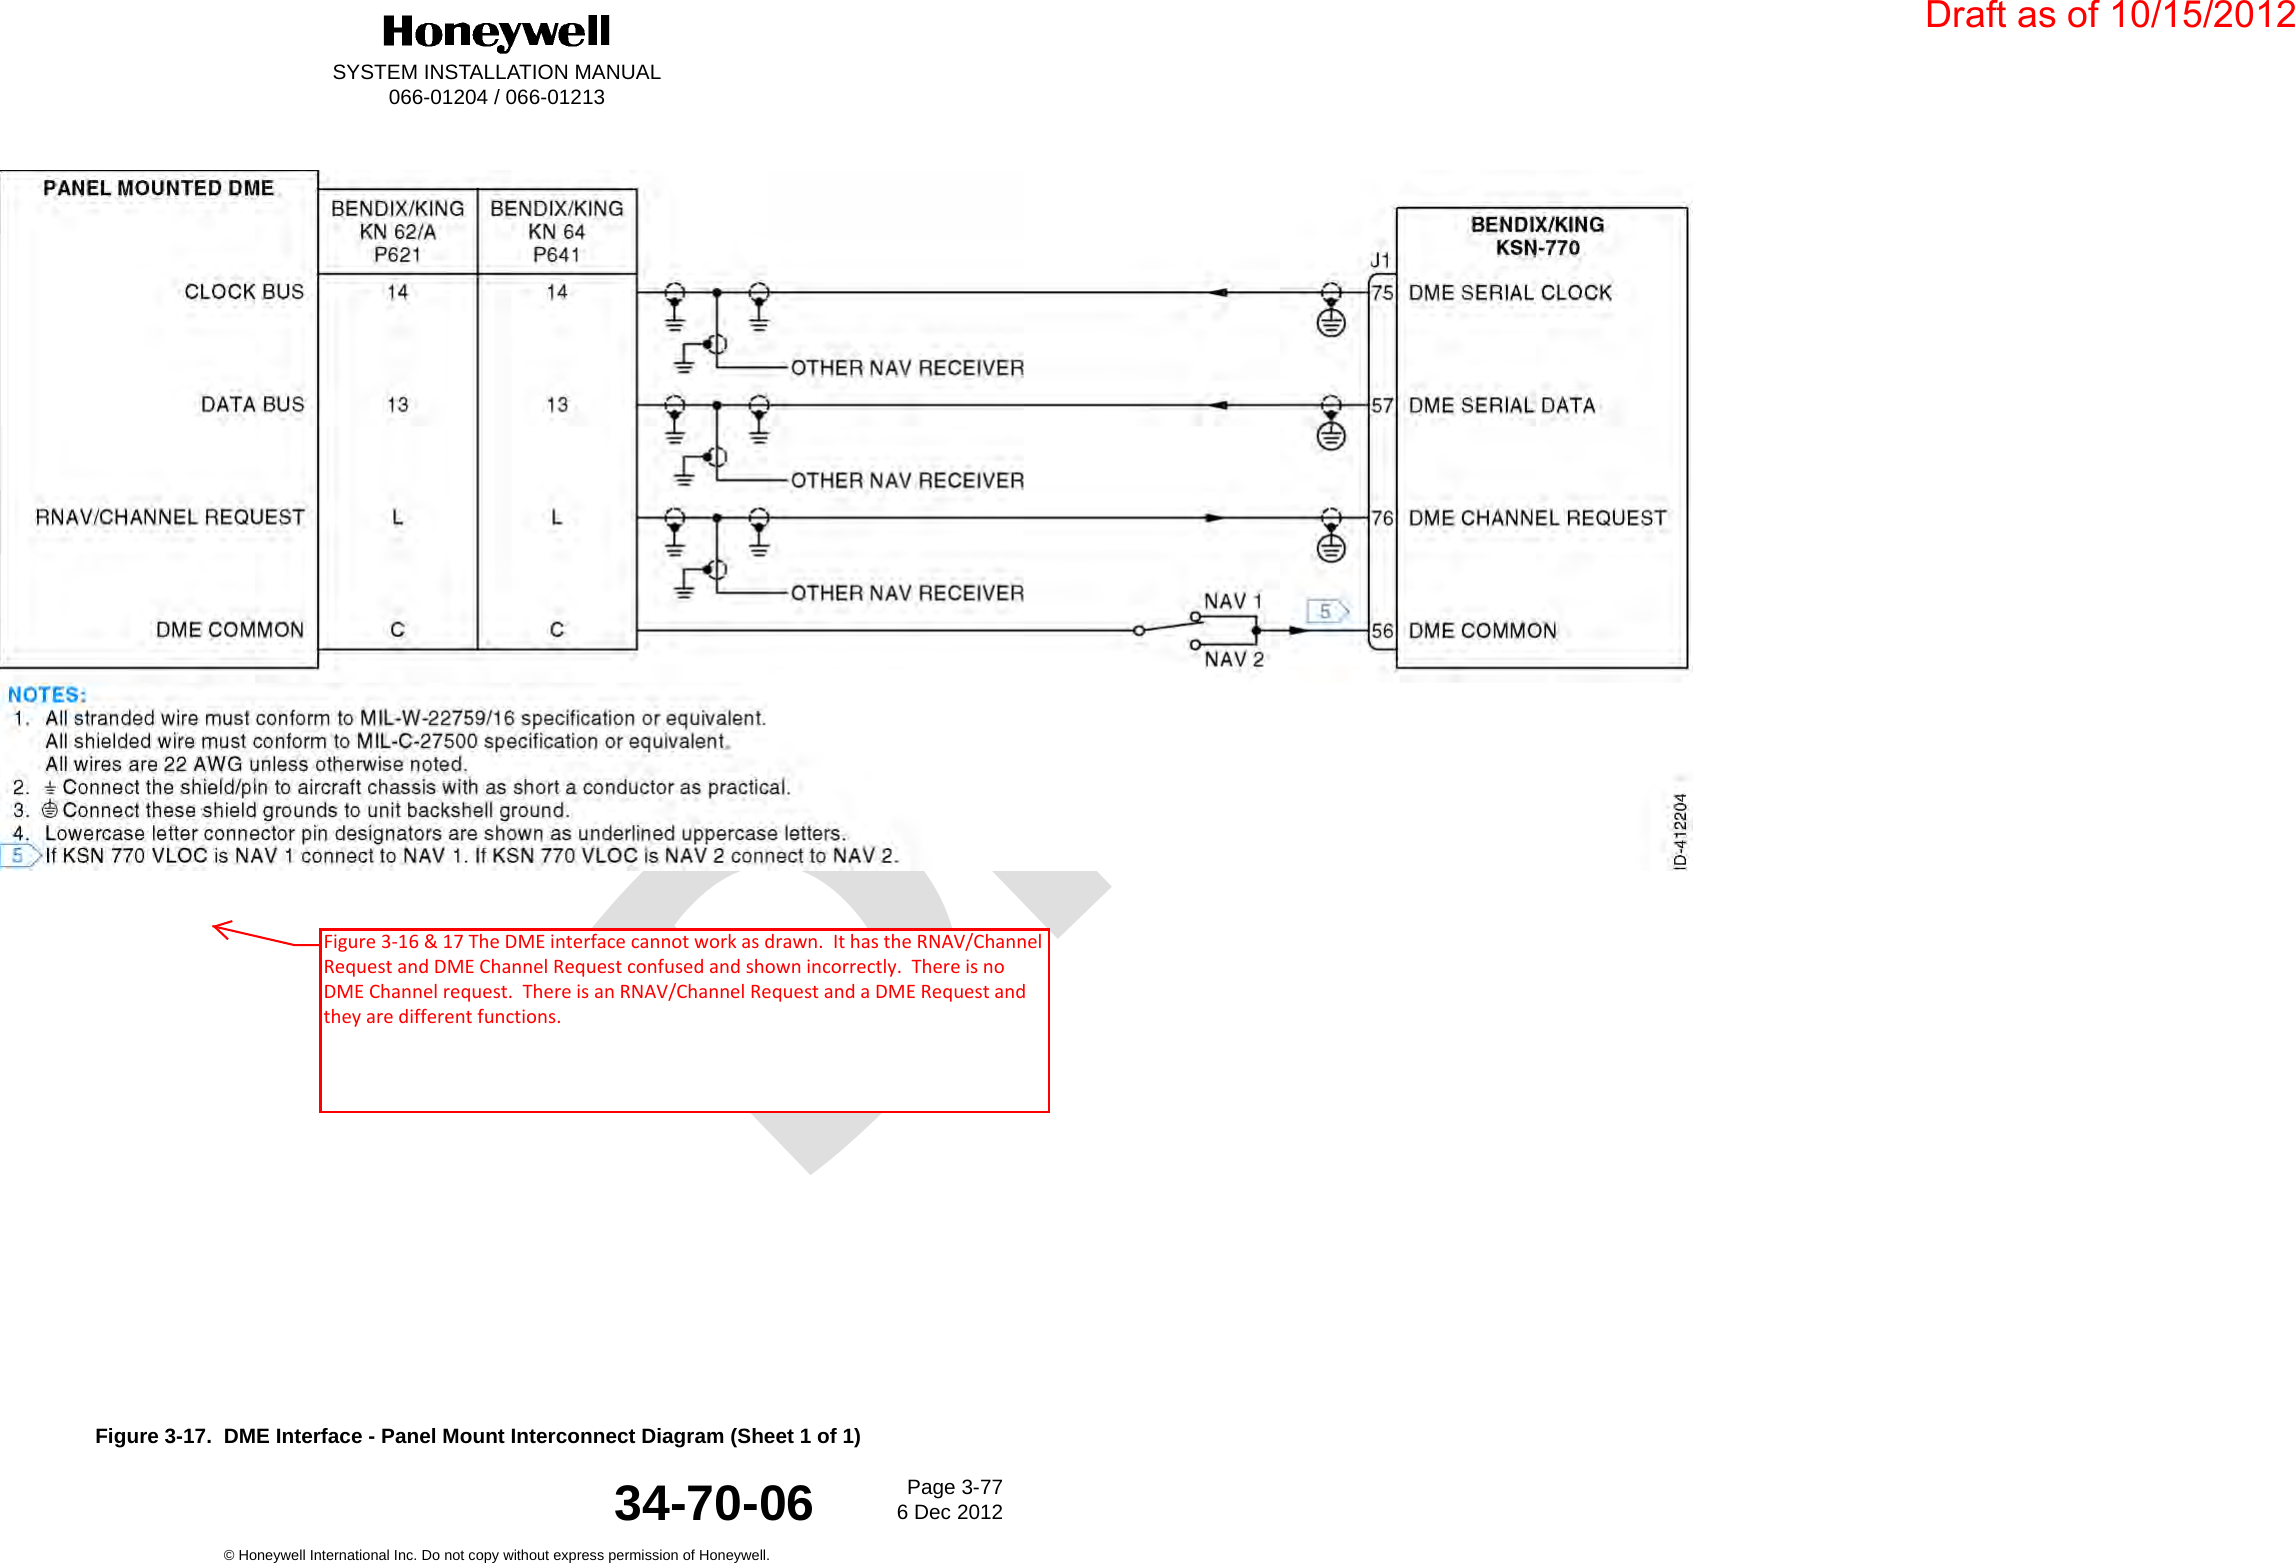 DraftSYSTEM INSTALLATION MANUAL066-01204 / 066-01213Page 3-776 Dec 2012© Honeywell International Inc. Do not copy without express permission of Honeywell.34-70-06Figure 3-17.  DME Interface - Panel Mount Interconnect Diagram (Sheet 1 of 1)Draft as of 10/15/2012Figure 3-16 &amp; 17 The DME interface cannot work as drawn.  It has the RNAV/Channel Request and DME Channel Request confused and shown incorrectly.  There is no DME Channel request.  There is an RNAV/Channel Request and a DME Request and they are different functions. 